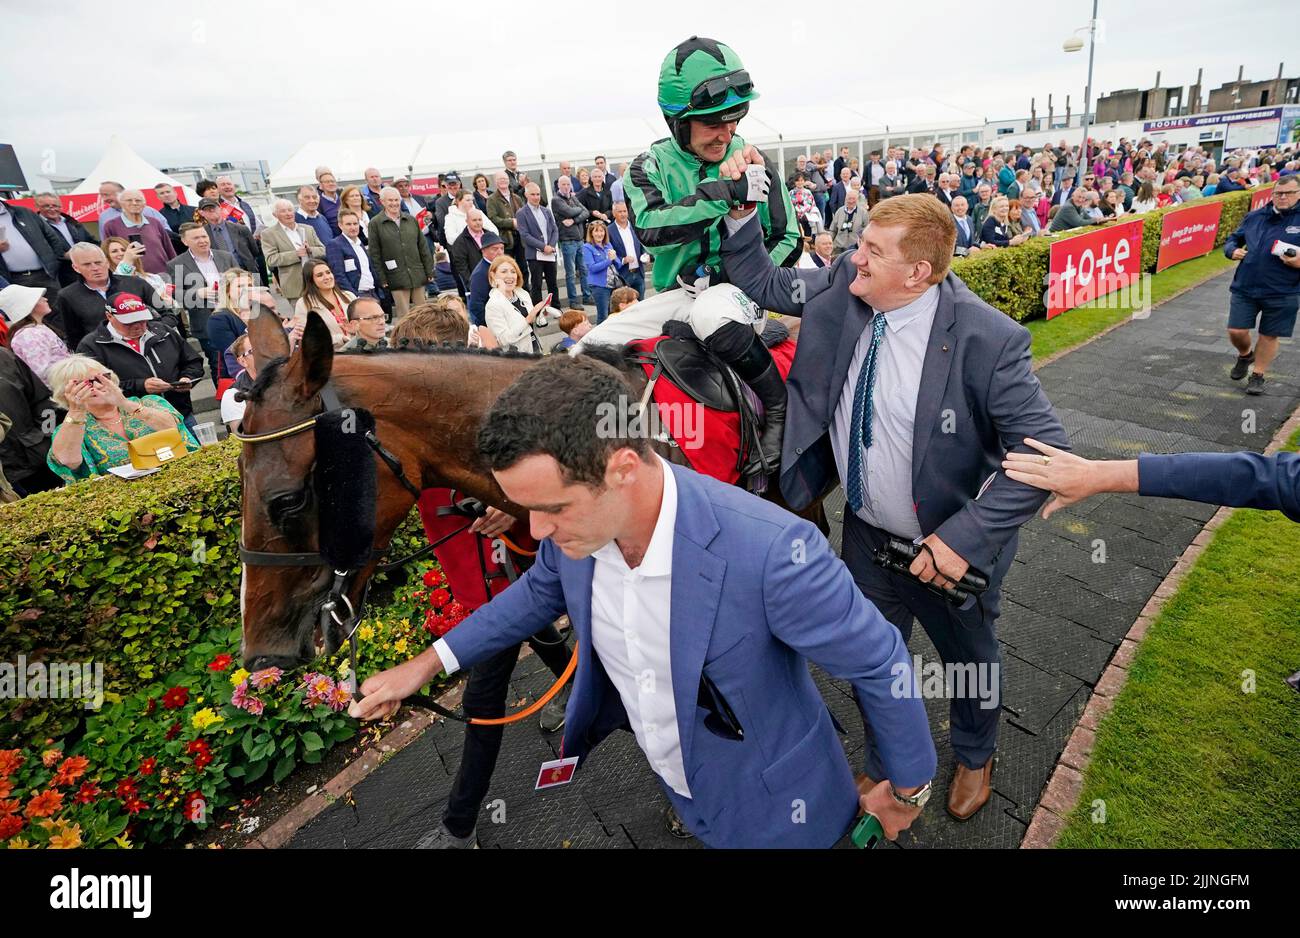 Hewick's trainer John Hanlon celebrates with Jockey Jordan Gainford in the parade ring after winning the The Tote Galway Plate during day three of the Galway Races Summer Festival 2022 at Galway Racecourse in County Galway, Ireland. Picture date: Wednesday July 27, 2022. Stock Photo